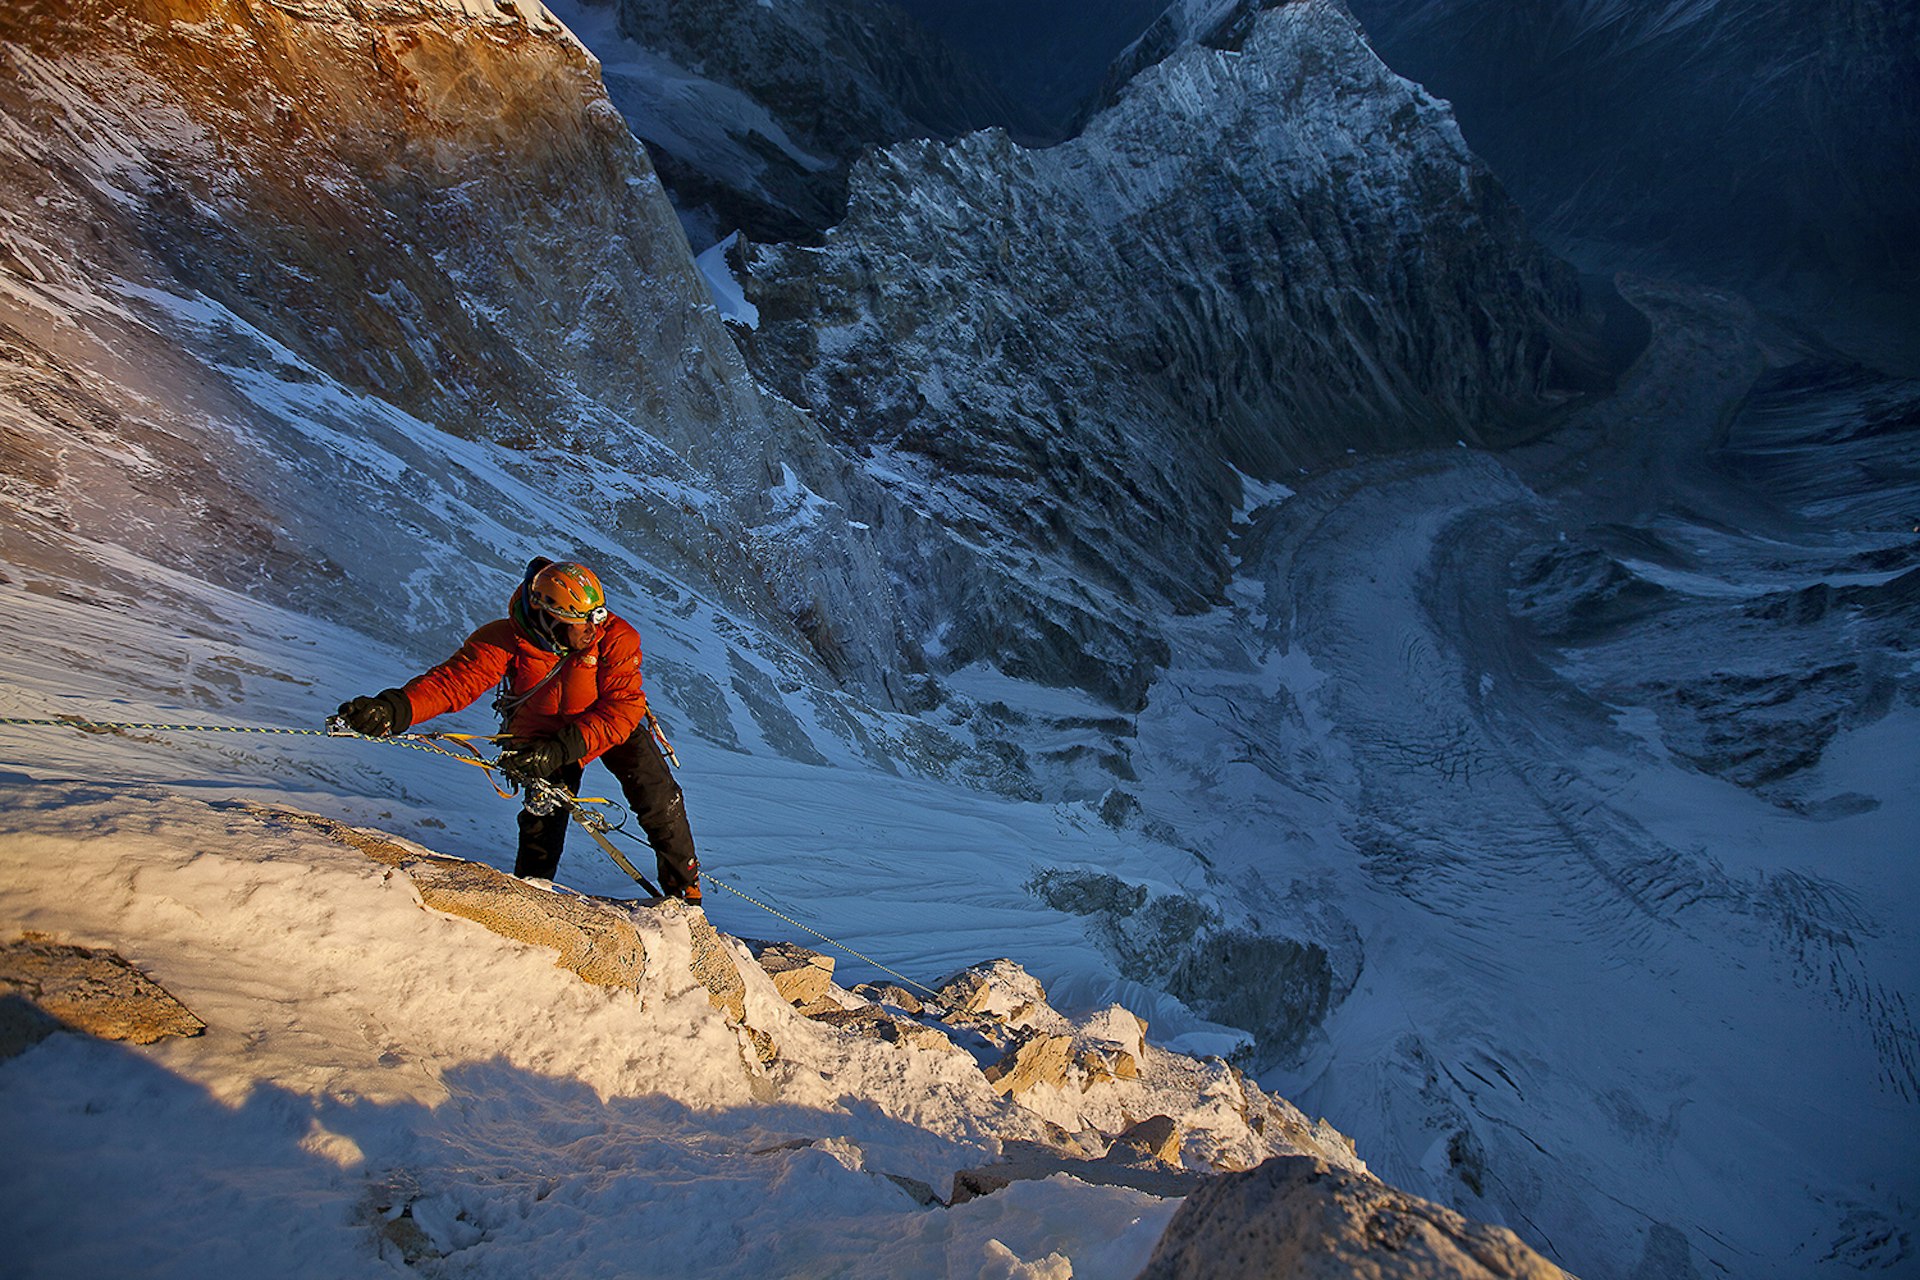 Interview: Climbing the toughest Himalayan peaks with the cast and crew of Meru